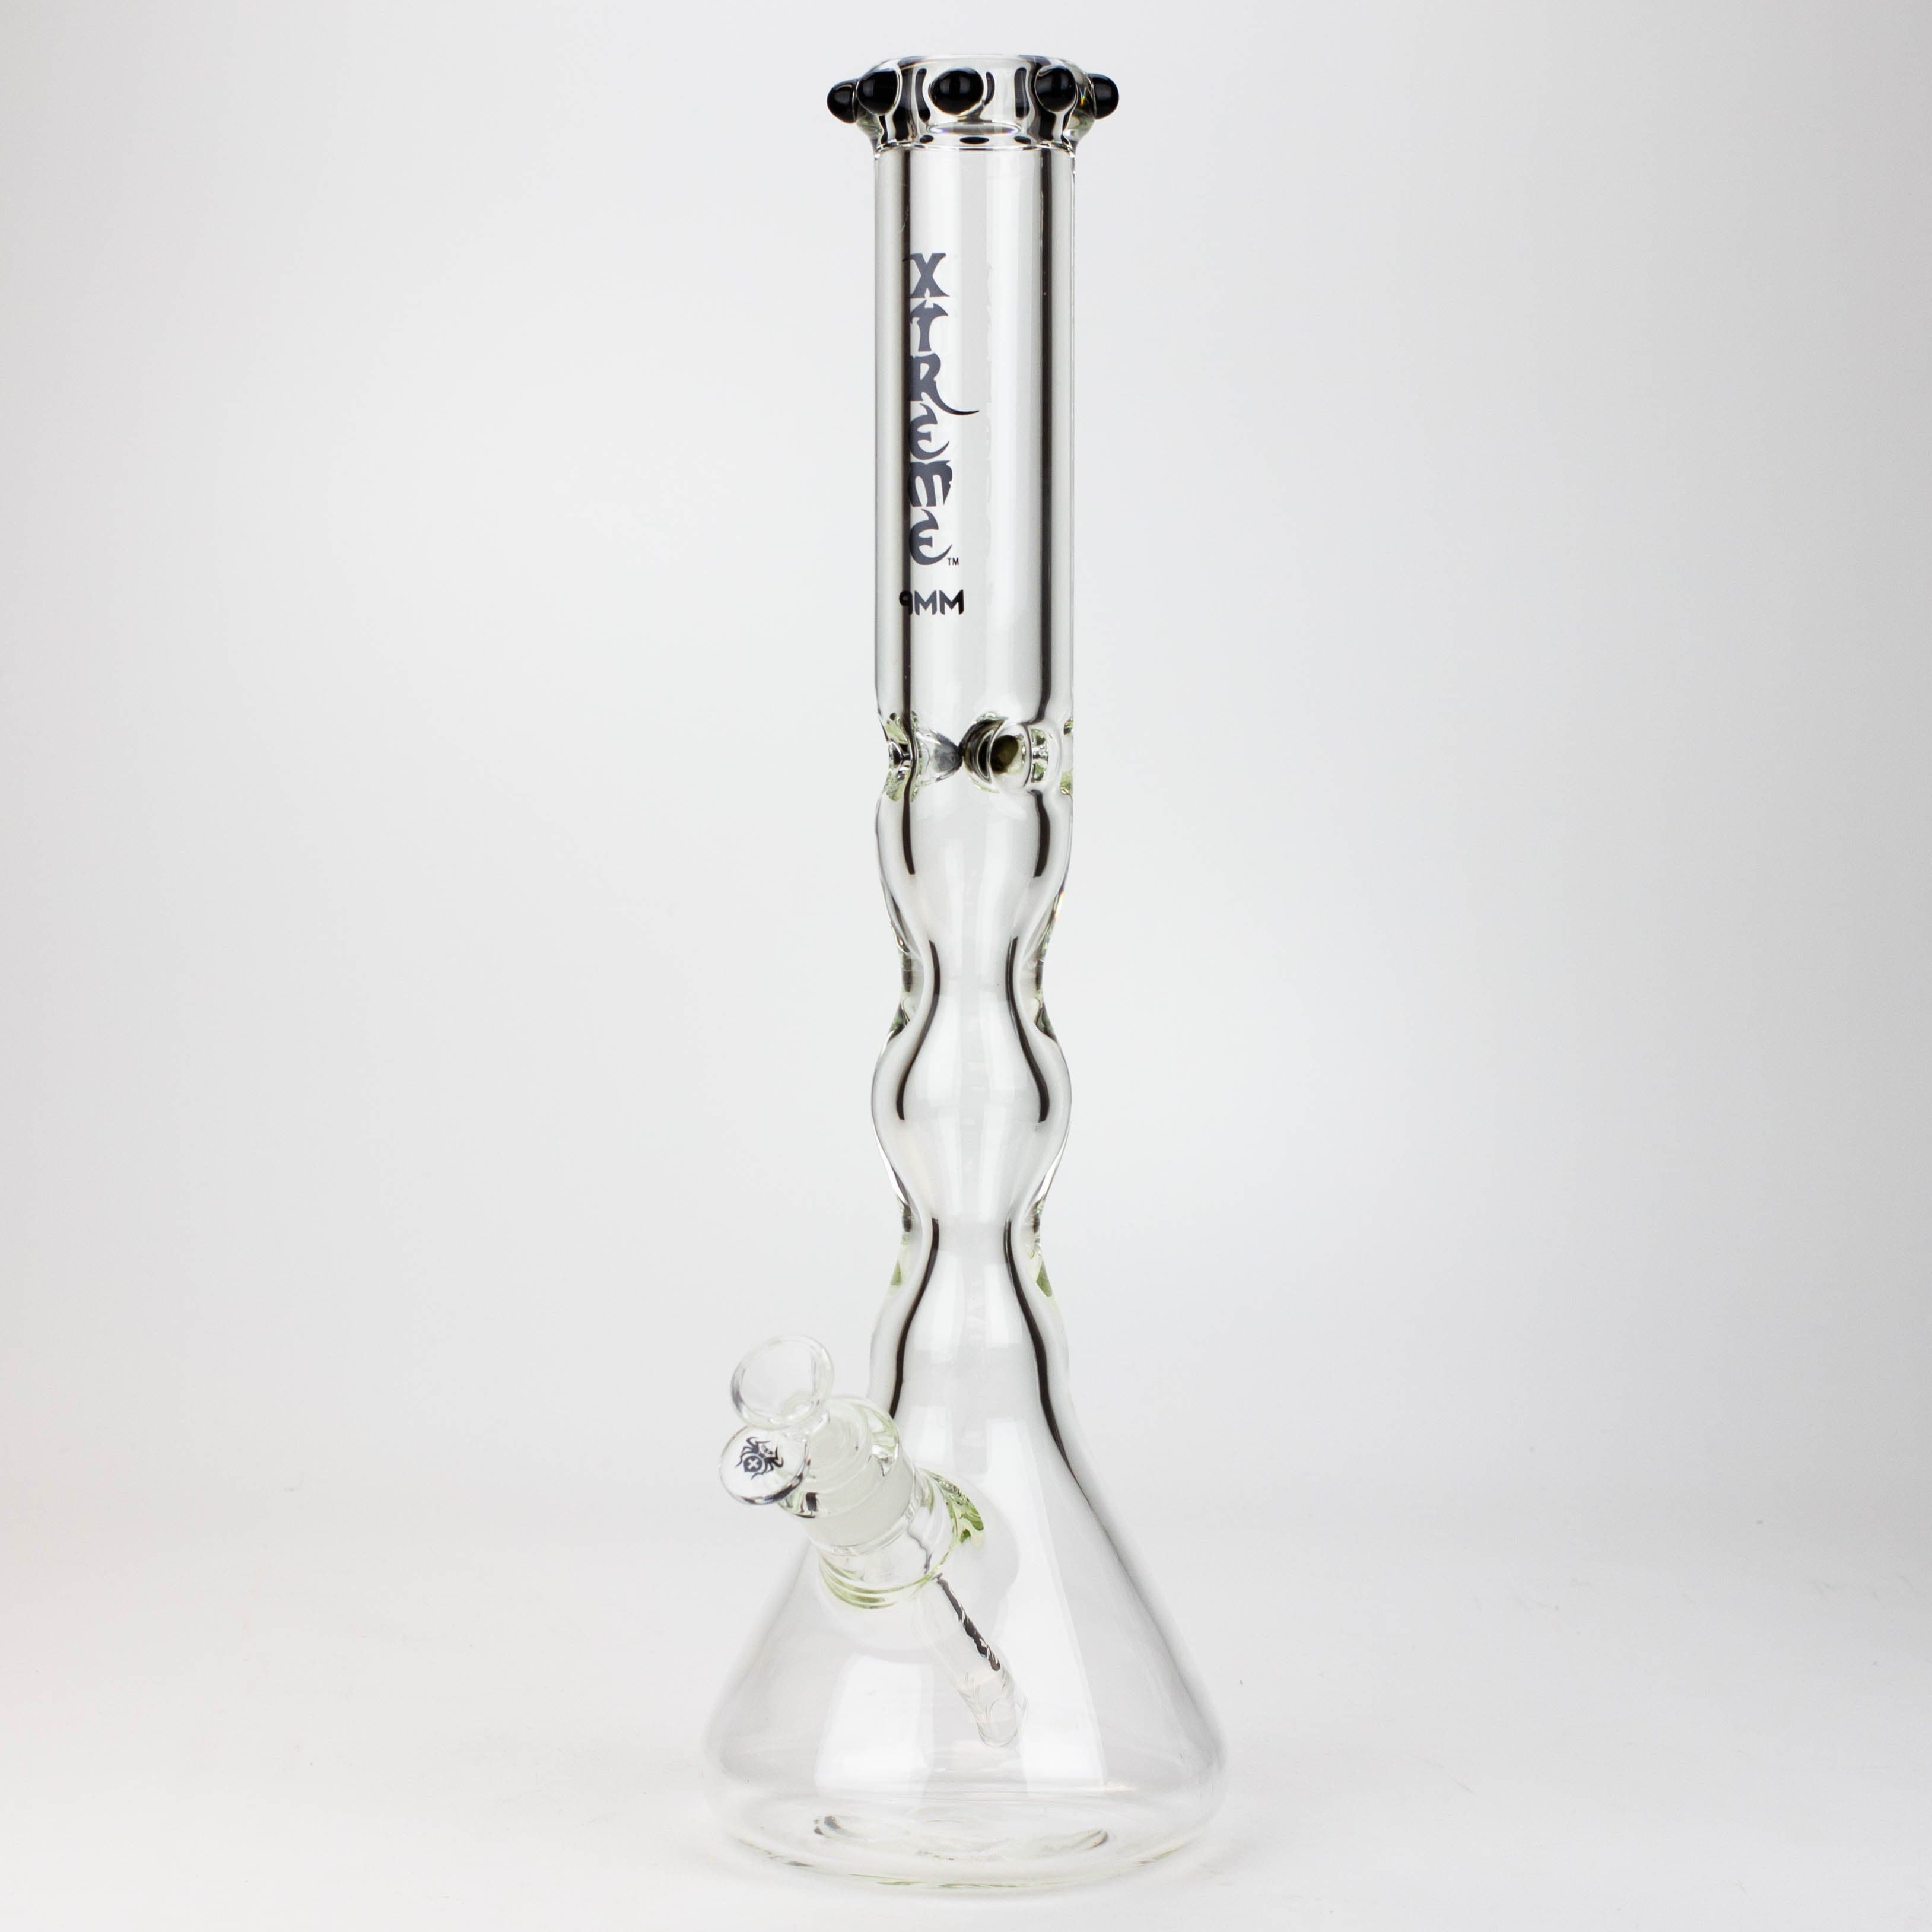 Xtreme curved tube glass water pipes_4